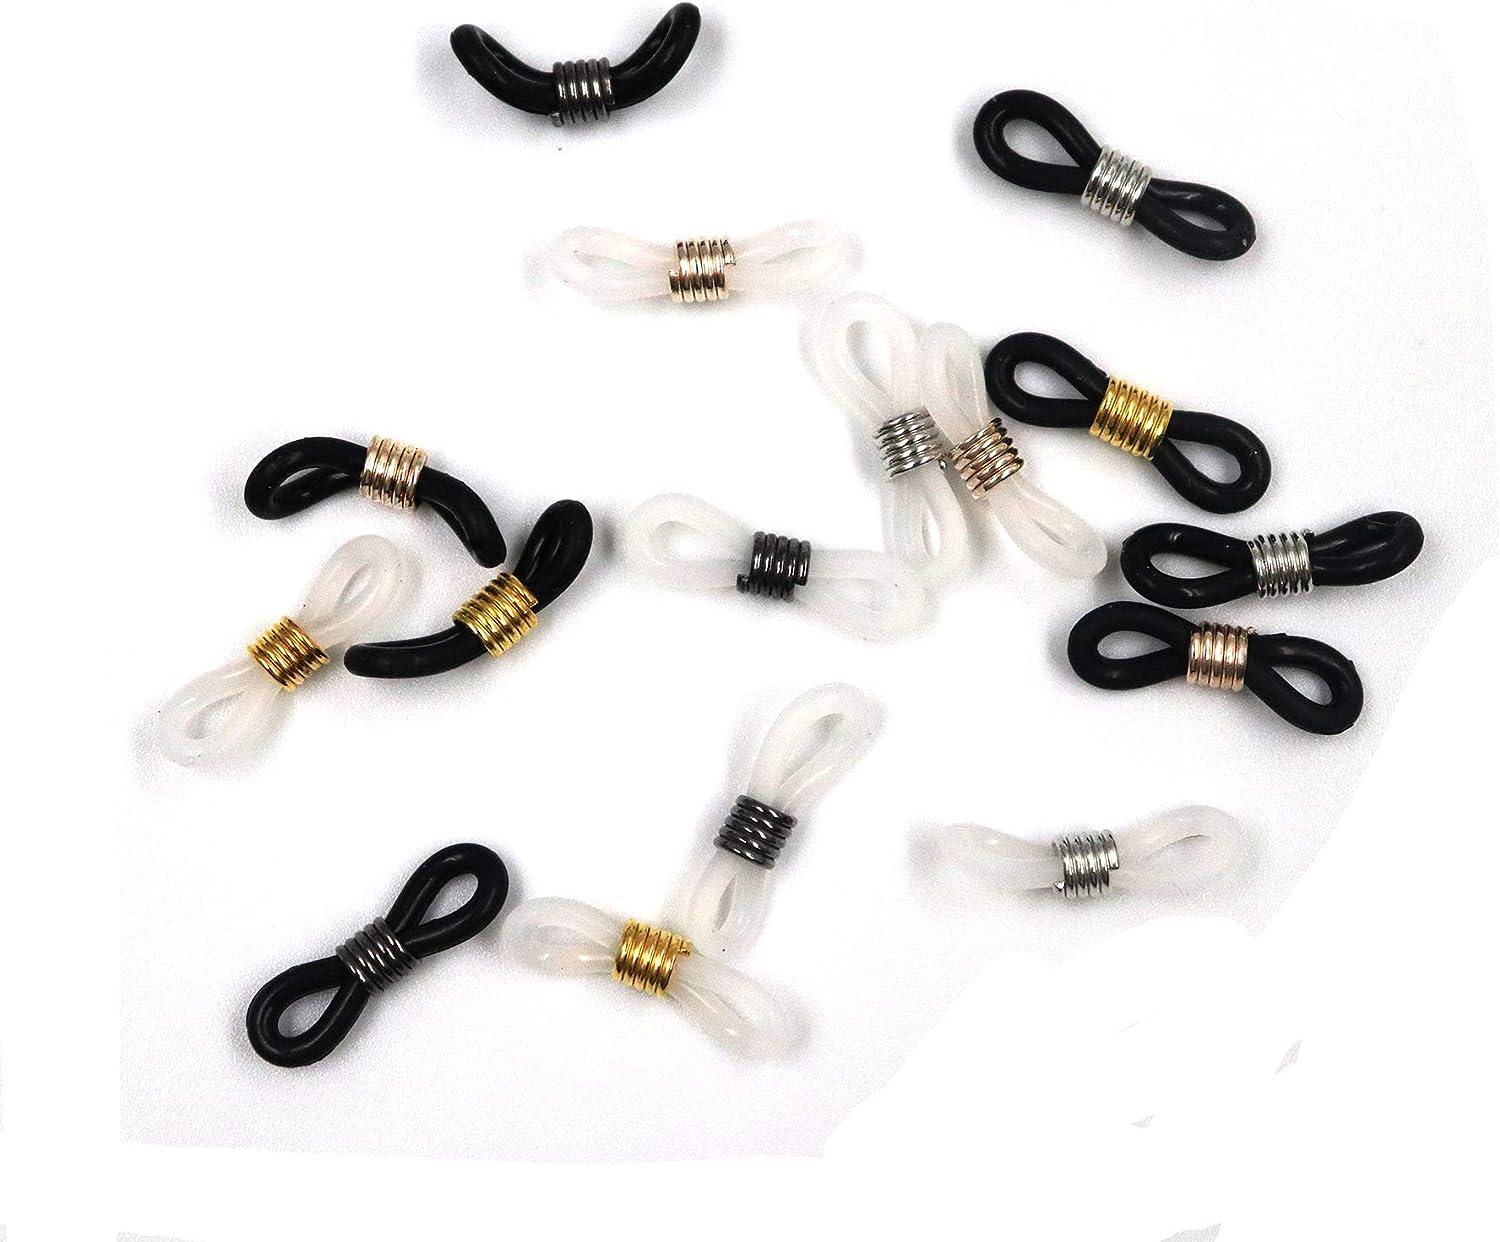 Silicone Eyeglass Holder 100pcs Eyeglass Chain Ends Silicone Glasses Anti  Chain Holder Connector Eyeglass Necklace Chain Holder 